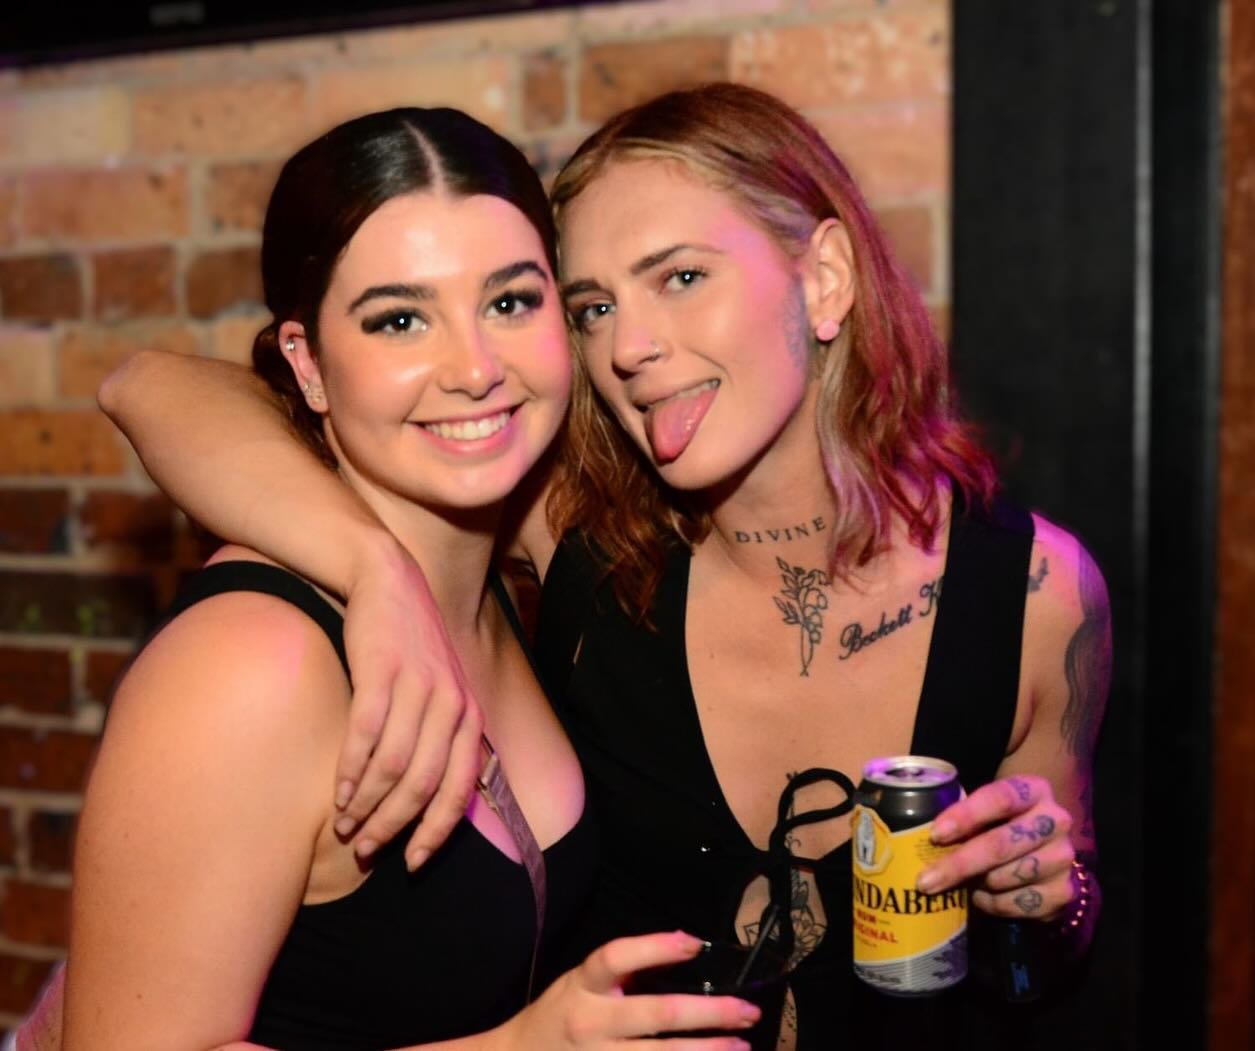 Weekend pictures are up 
Come Early to get the best value out of you night out :)

#party #early #cubehotel #toowoomba #cocktails #drink #dnace